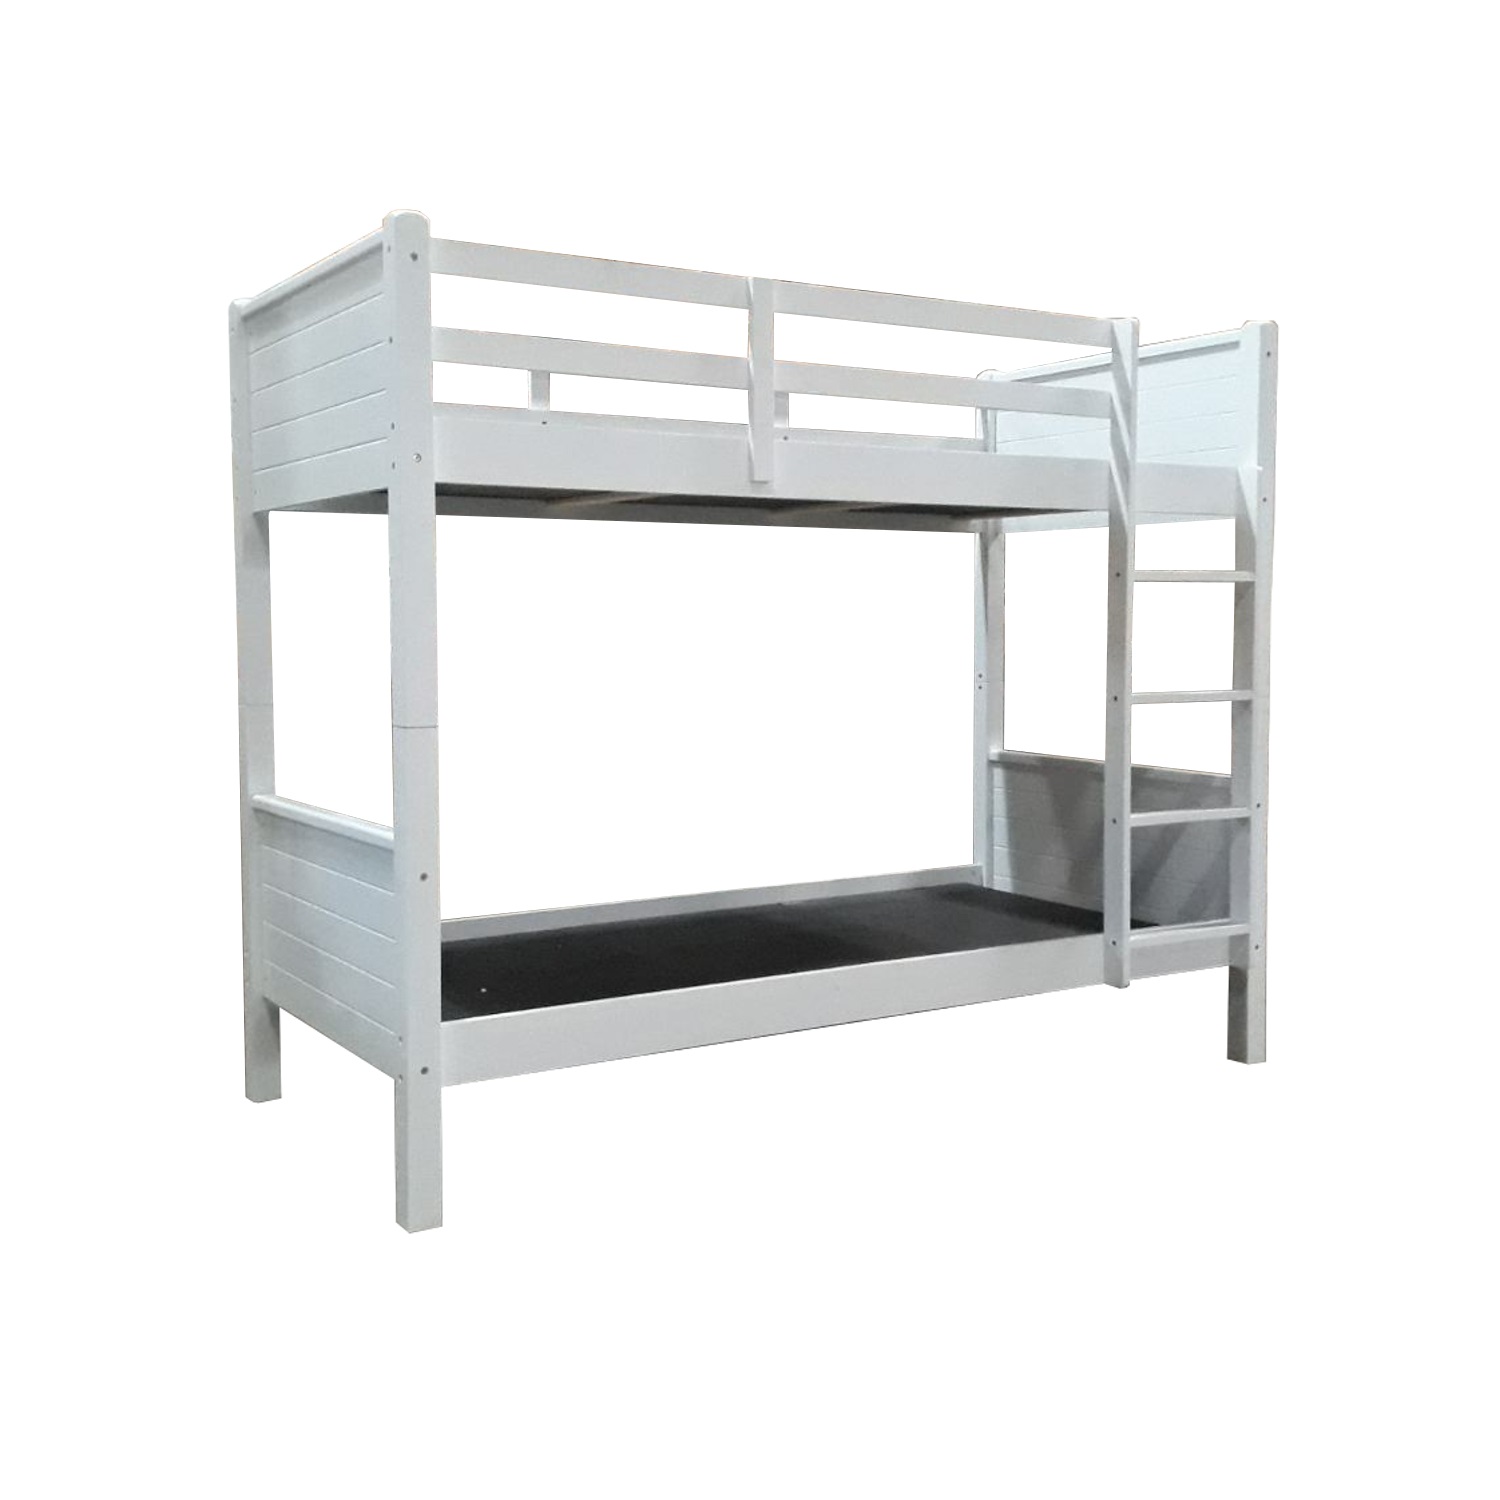 Beatrice Bunk Bed Furniture, Space Saving Bunk Beds Philippines